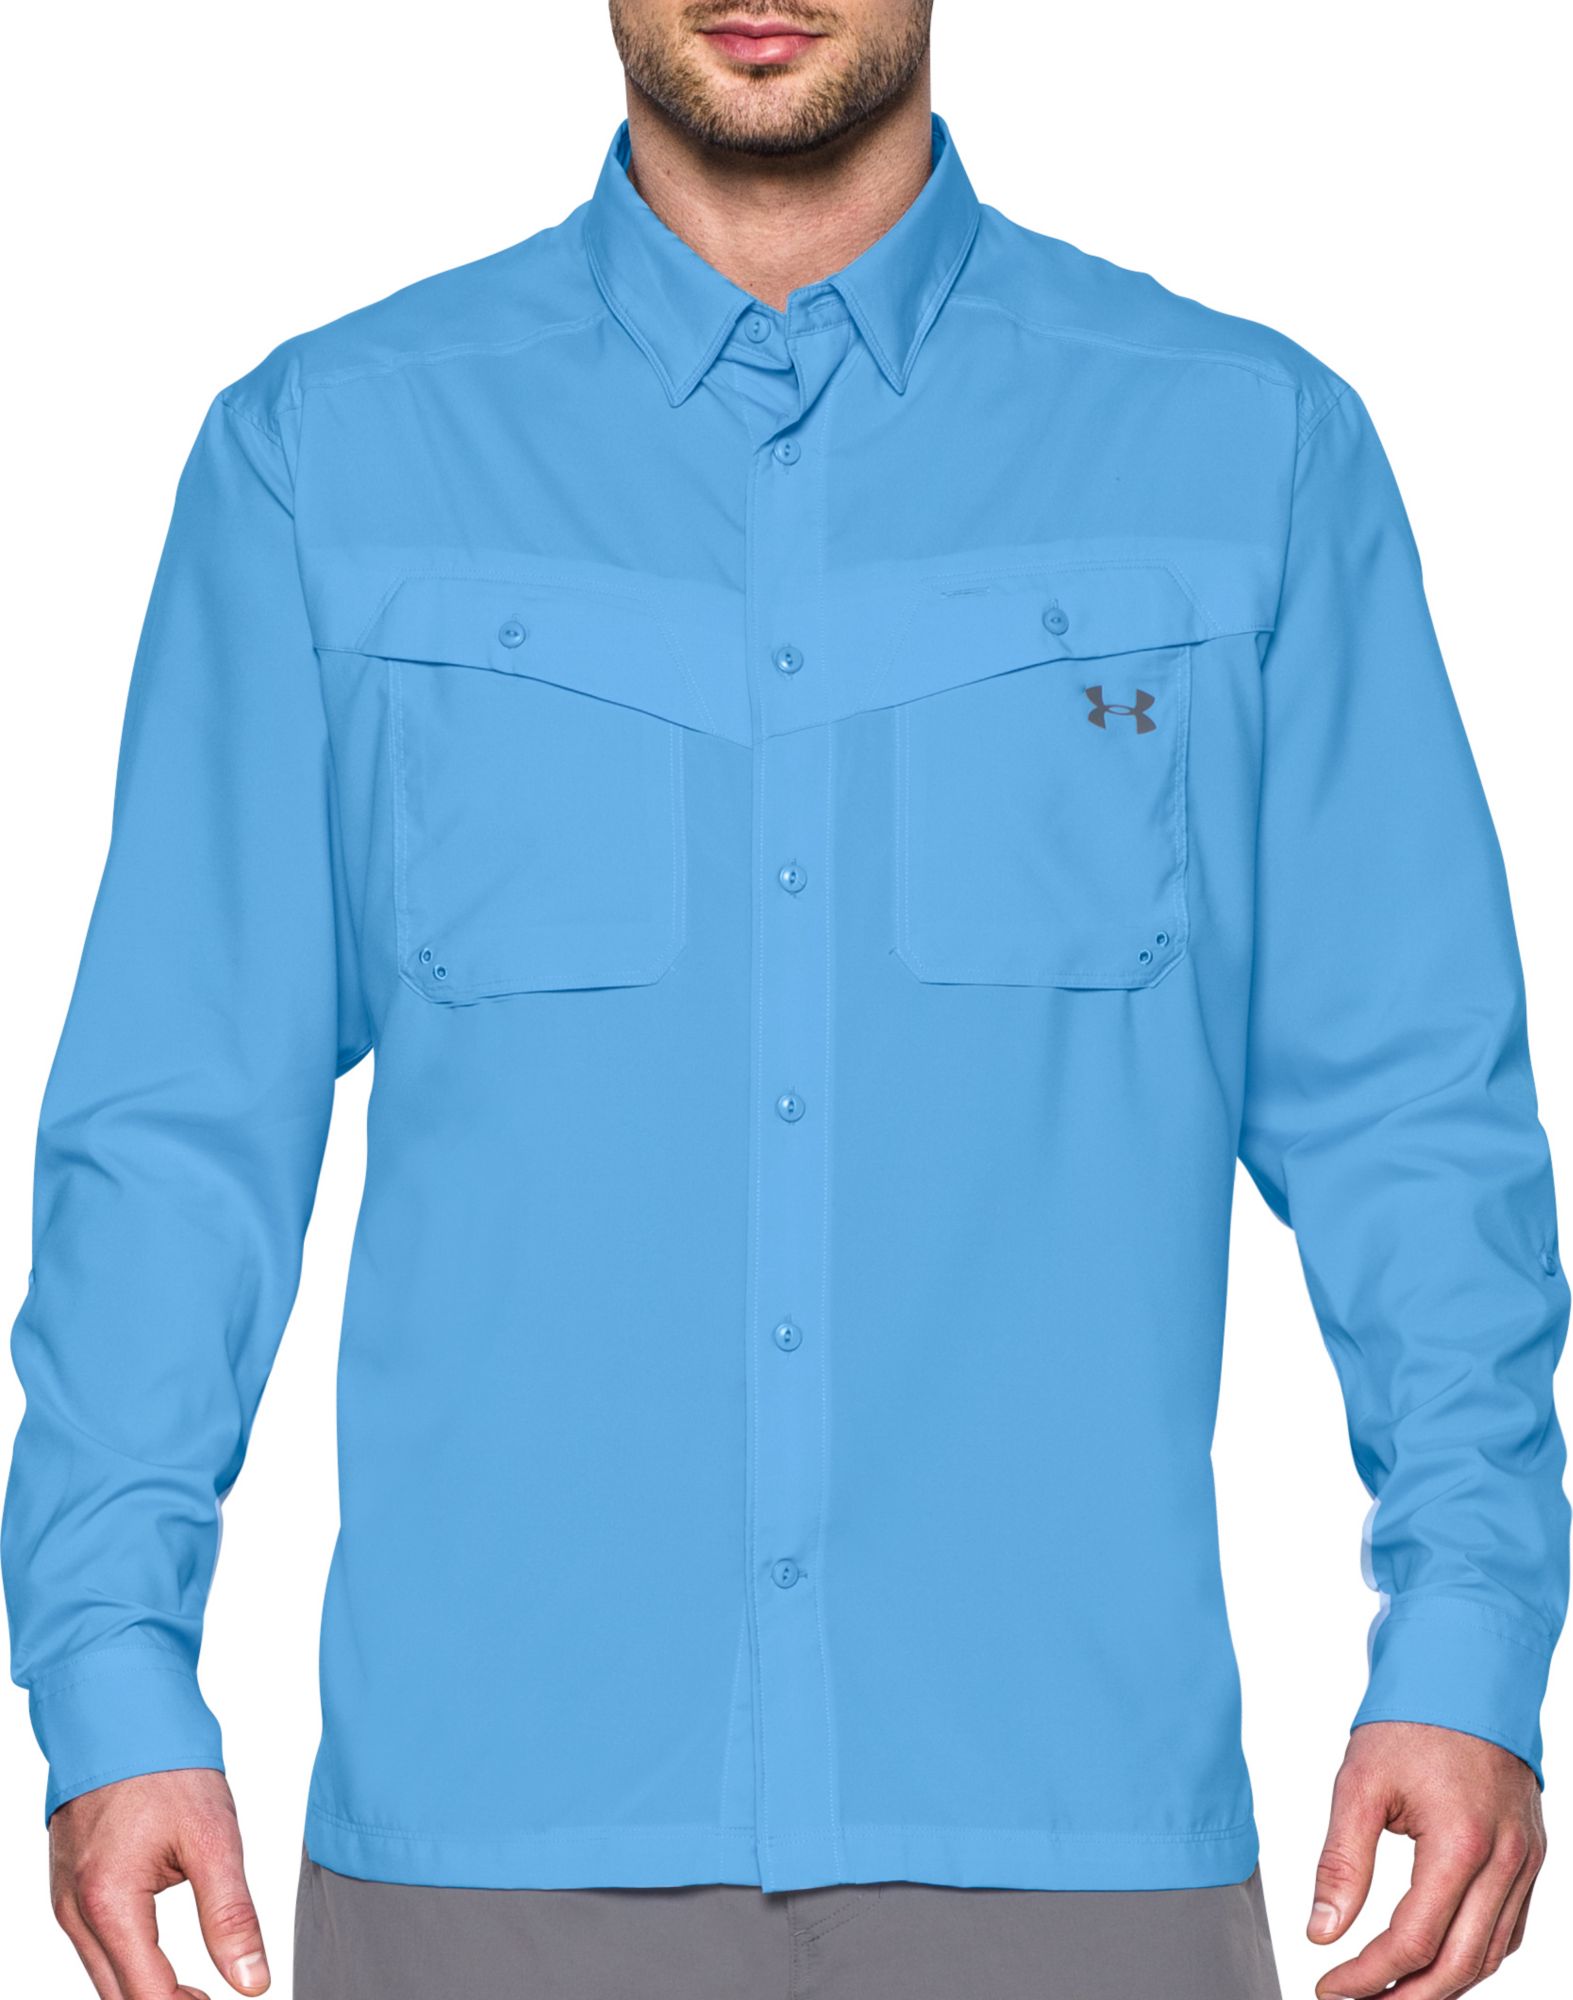 under armour tide chaser long sleeve